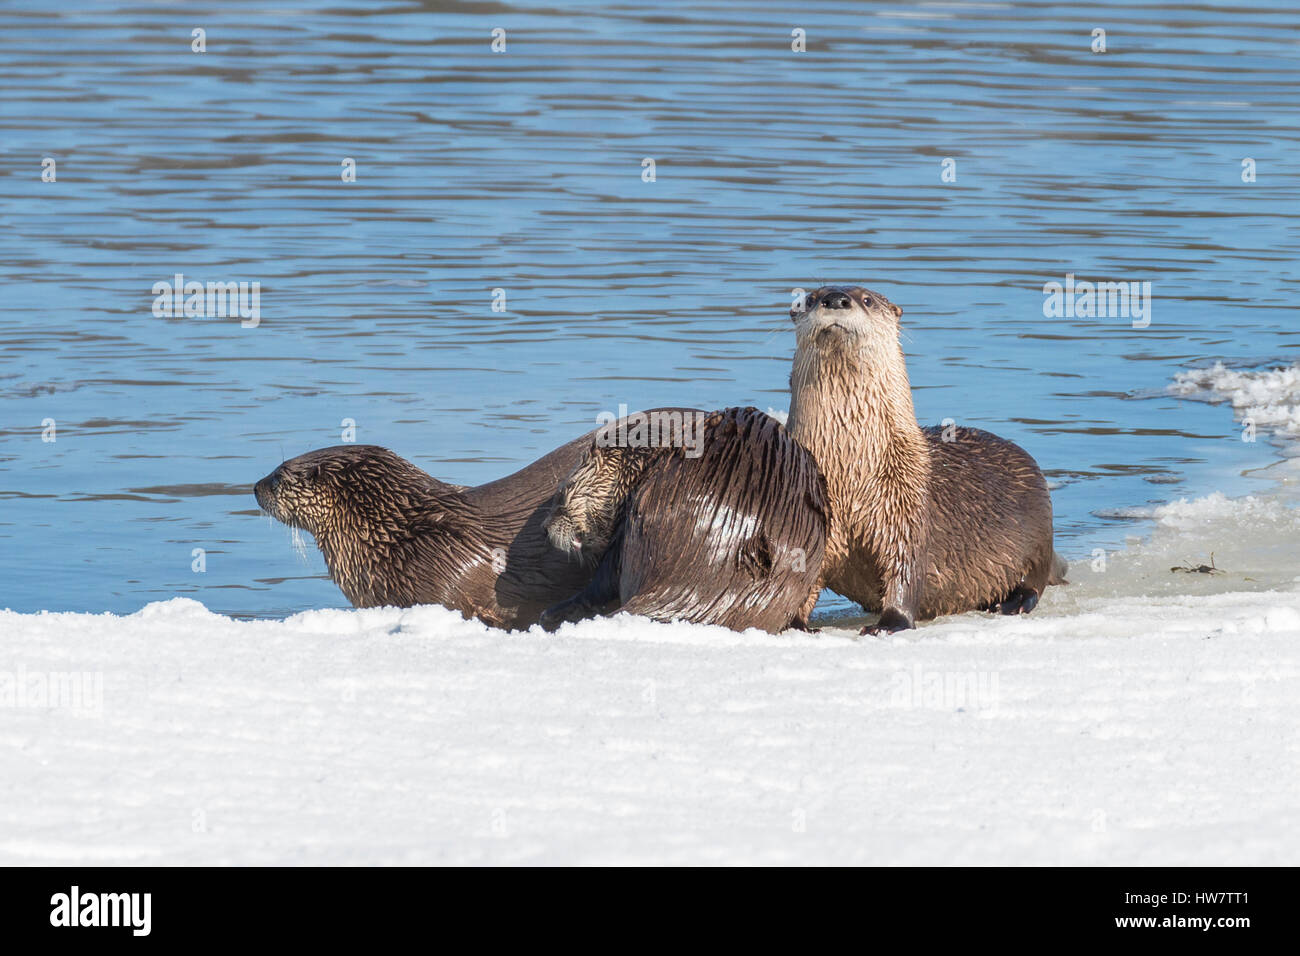 River otters cavorting along the ice on the Yellowstone River. Stock Photo